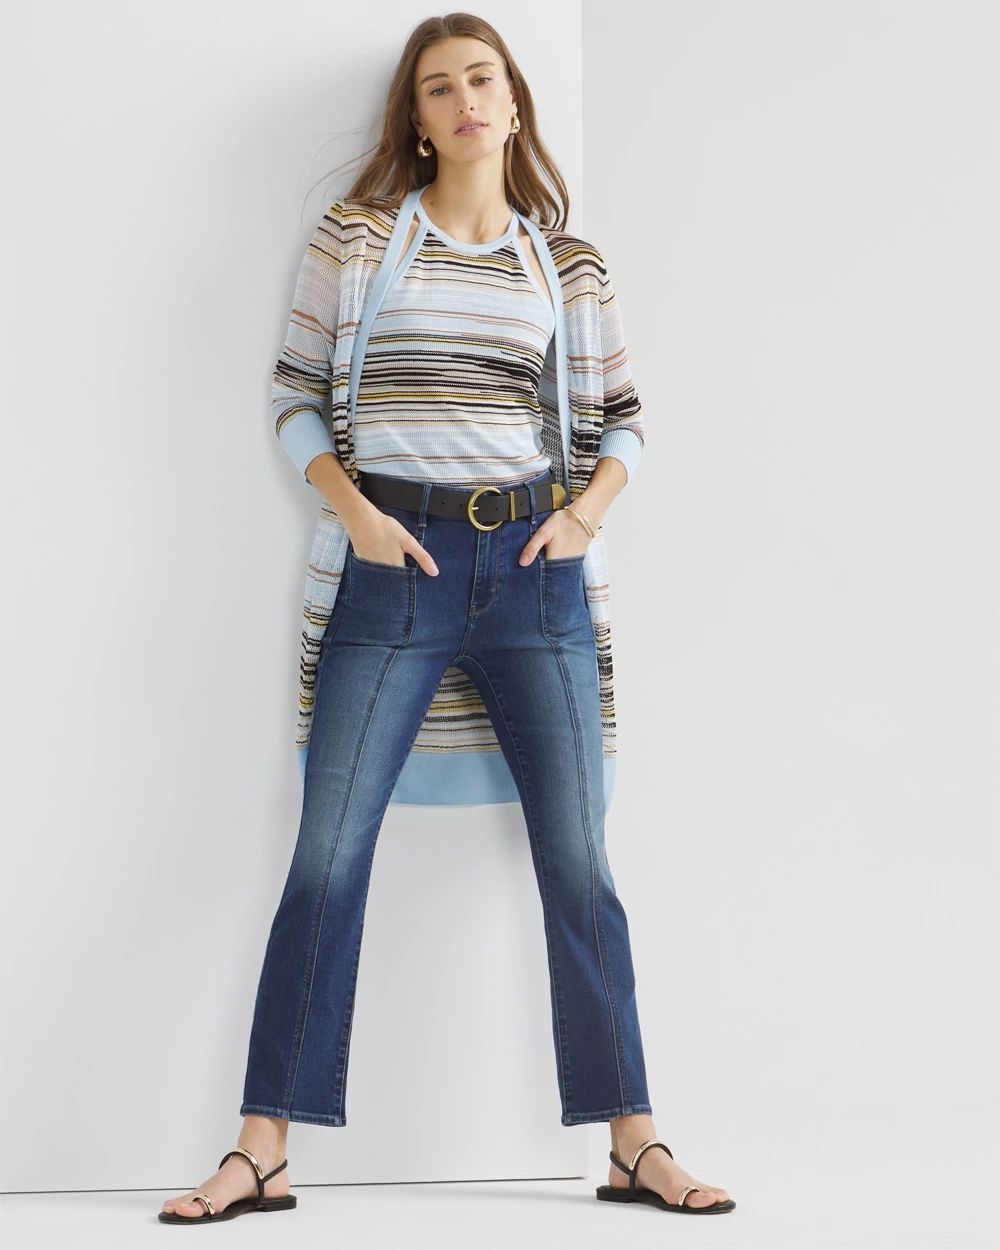 High-Rise Everyday Soft Denim Double Pocket Bootcut Jeans click to view larger image.